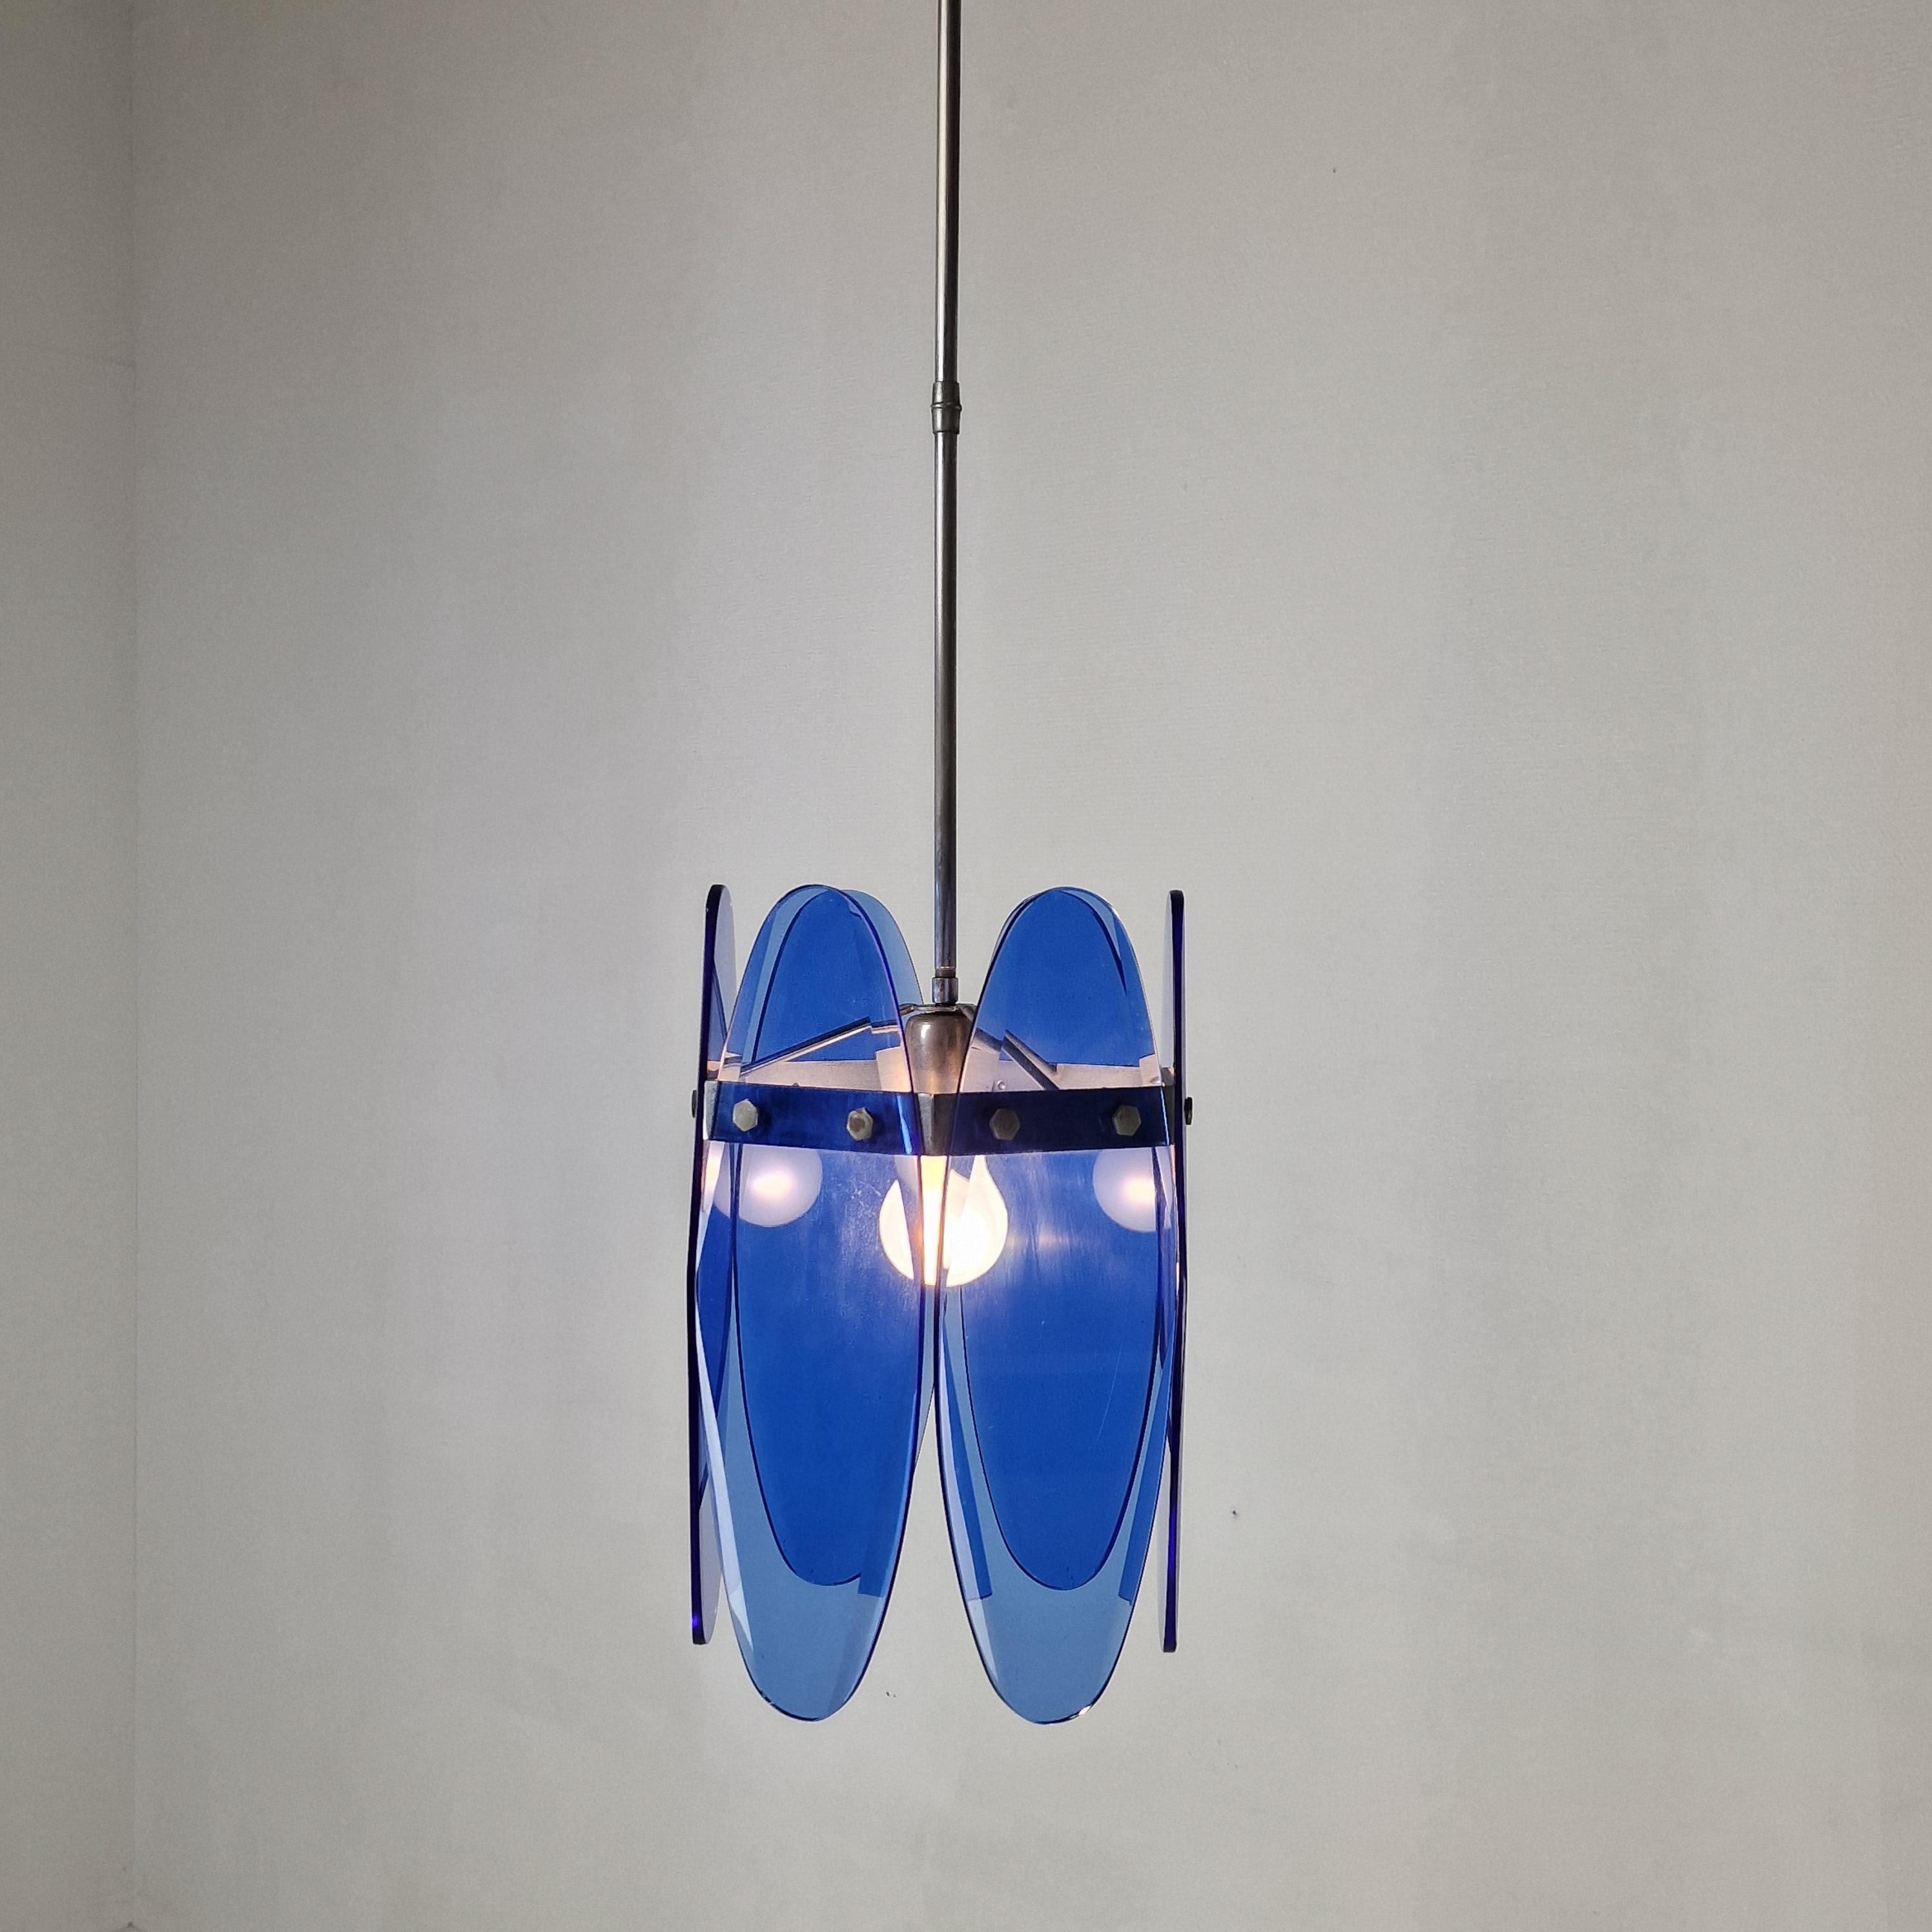 Mid-Century Modern Blue Glass Chandelier or Pendant by Veca, Italy 1970's For Sale 2